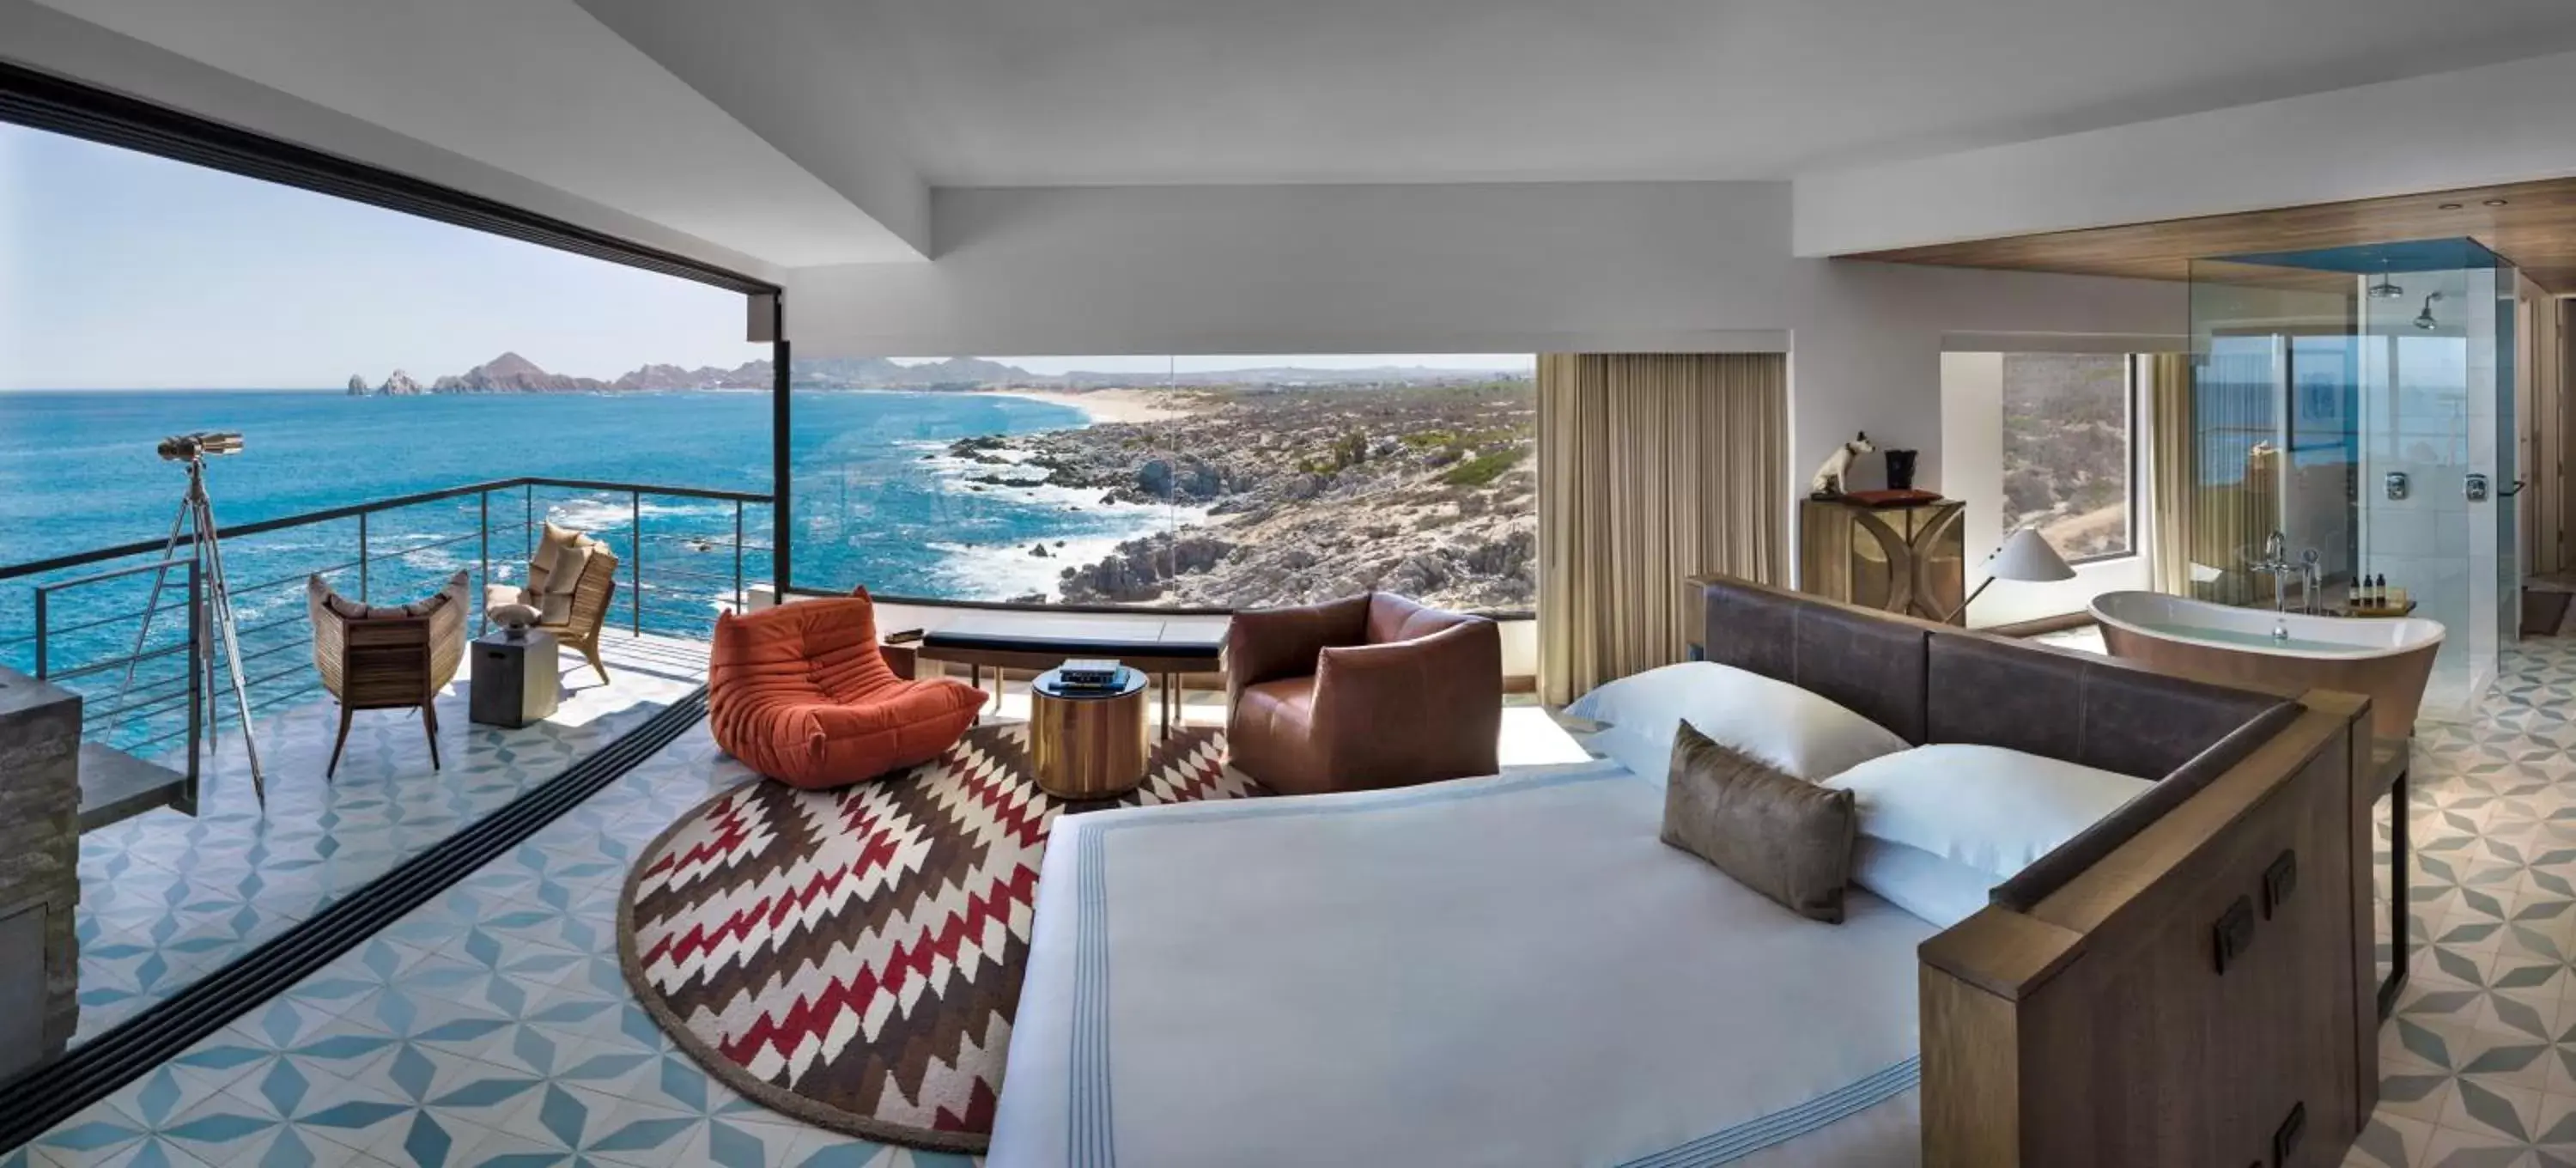 Panoramic Suite with Plunge Pool and Ocean View in The Cape, a Thompson Hotel, part of Hyatt